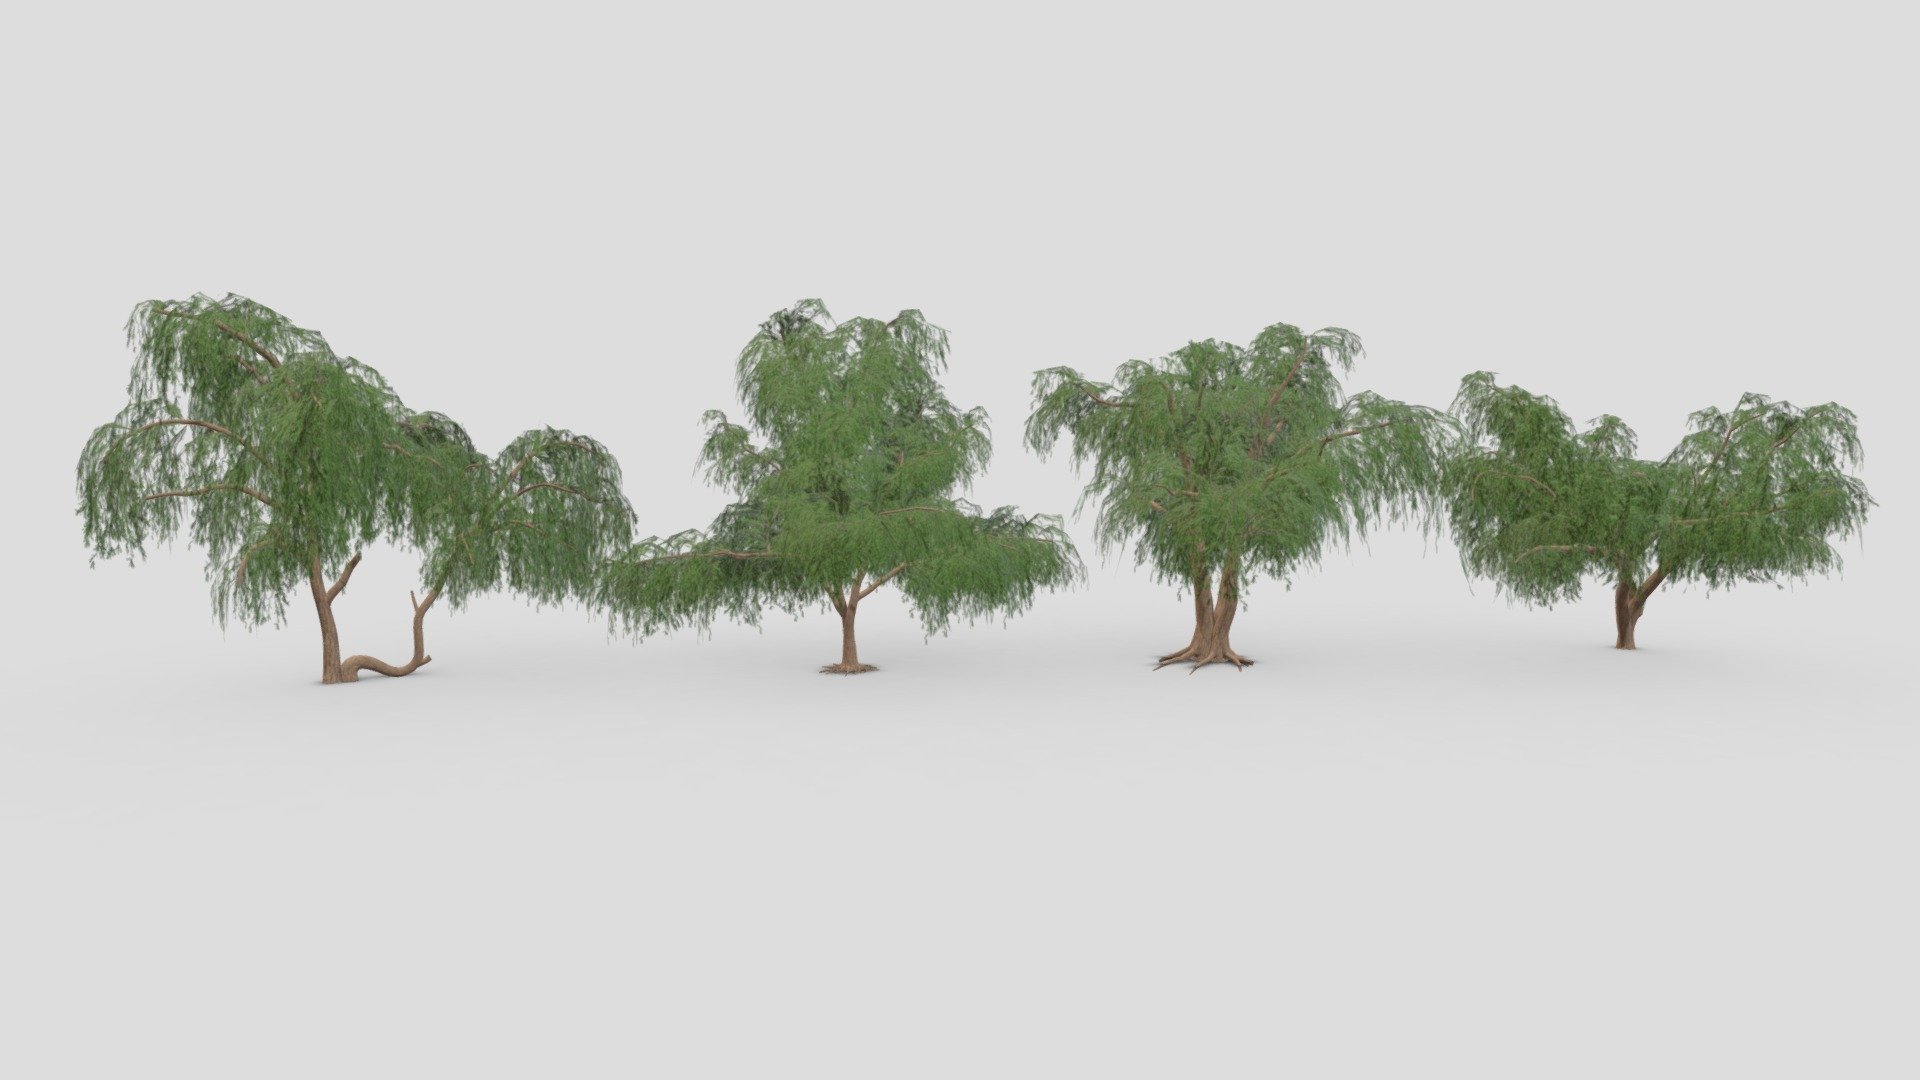 This is a low poly 3D Model collection of the Prosopis tree. This collection contains 4 3D Models of the Prosopis tree. I tried to provide you a low poly collection of the Prosopis Tree, you can use that in your projects 3d model